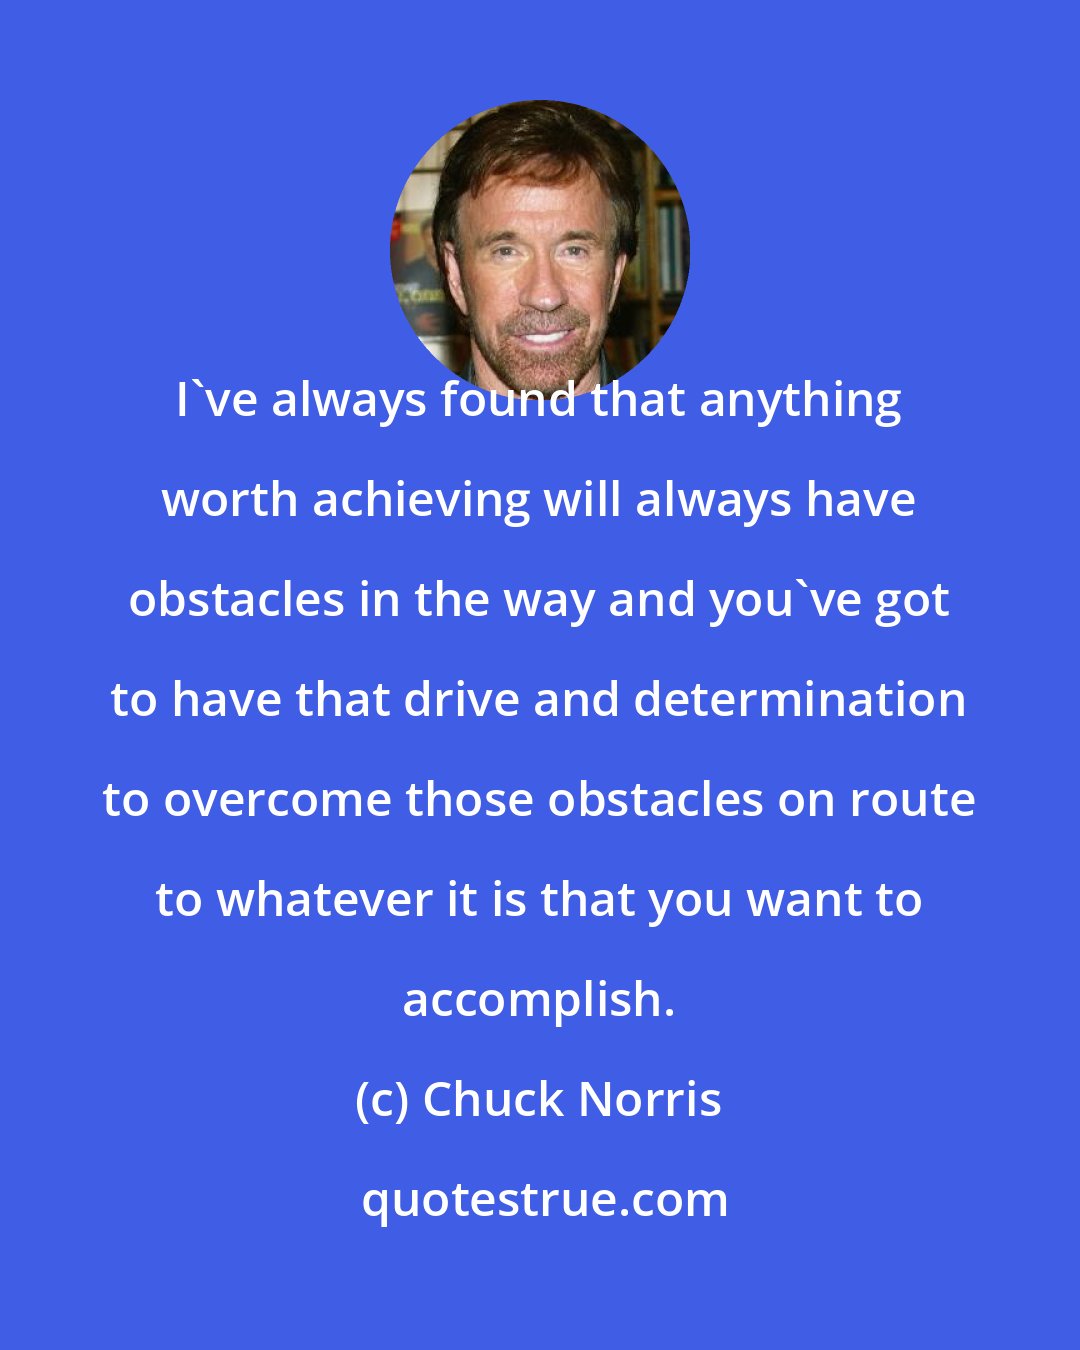 Chuck Norris: I've always found that anything worth achieving will always have obstacles in the way and you've got to have that drive and determination to overcome those obstacles on route to whatever it is that you want to accomplish.